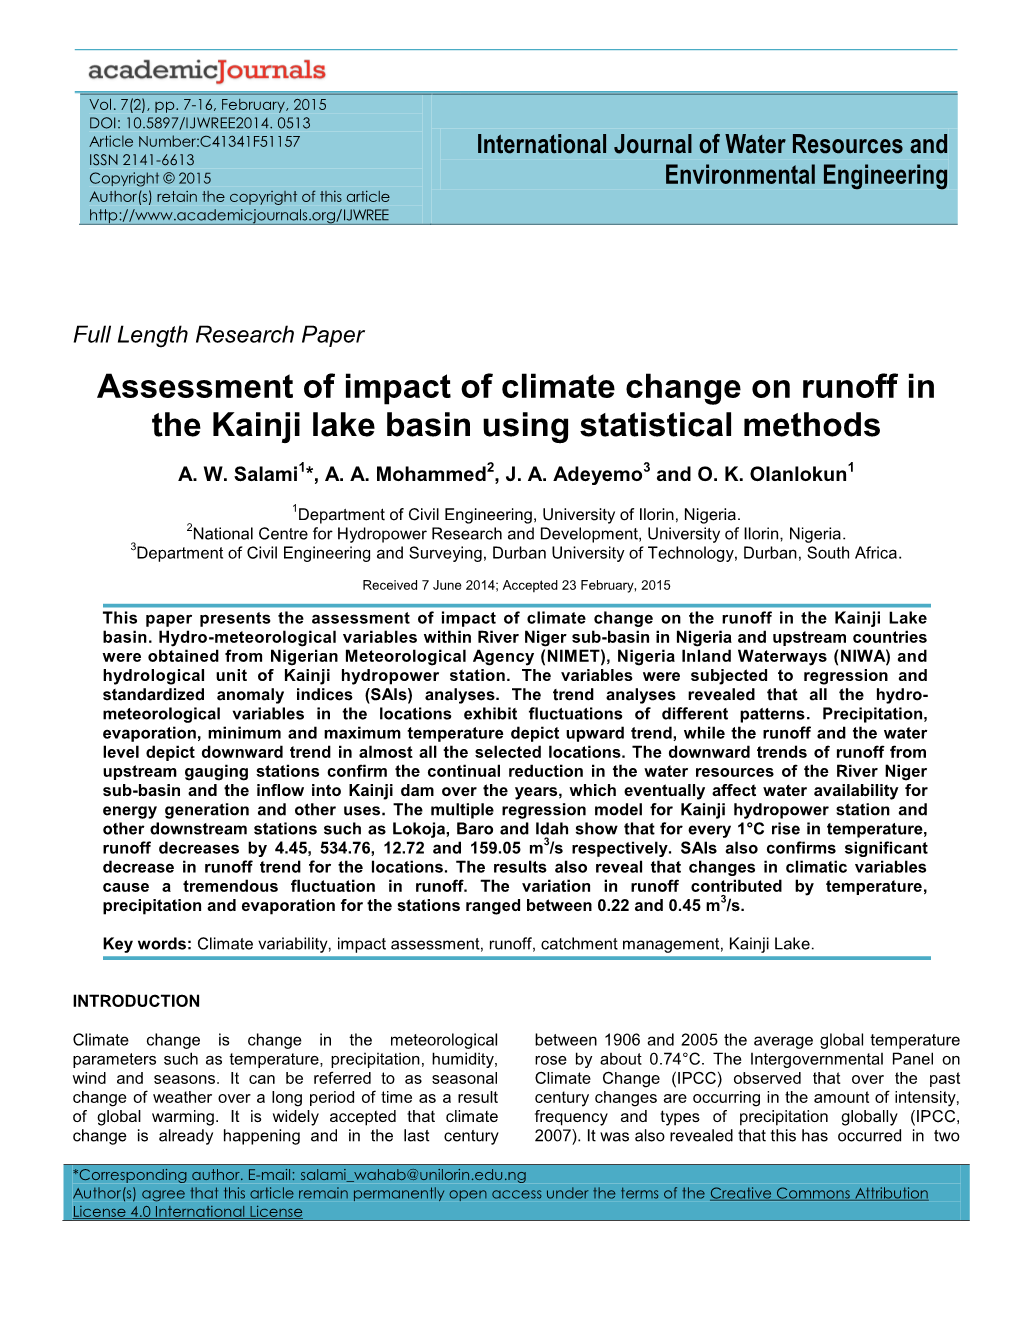 Assessment of Impact of Climate Change on Runoff in the Kainji Lake Basin Using Statistical Methods